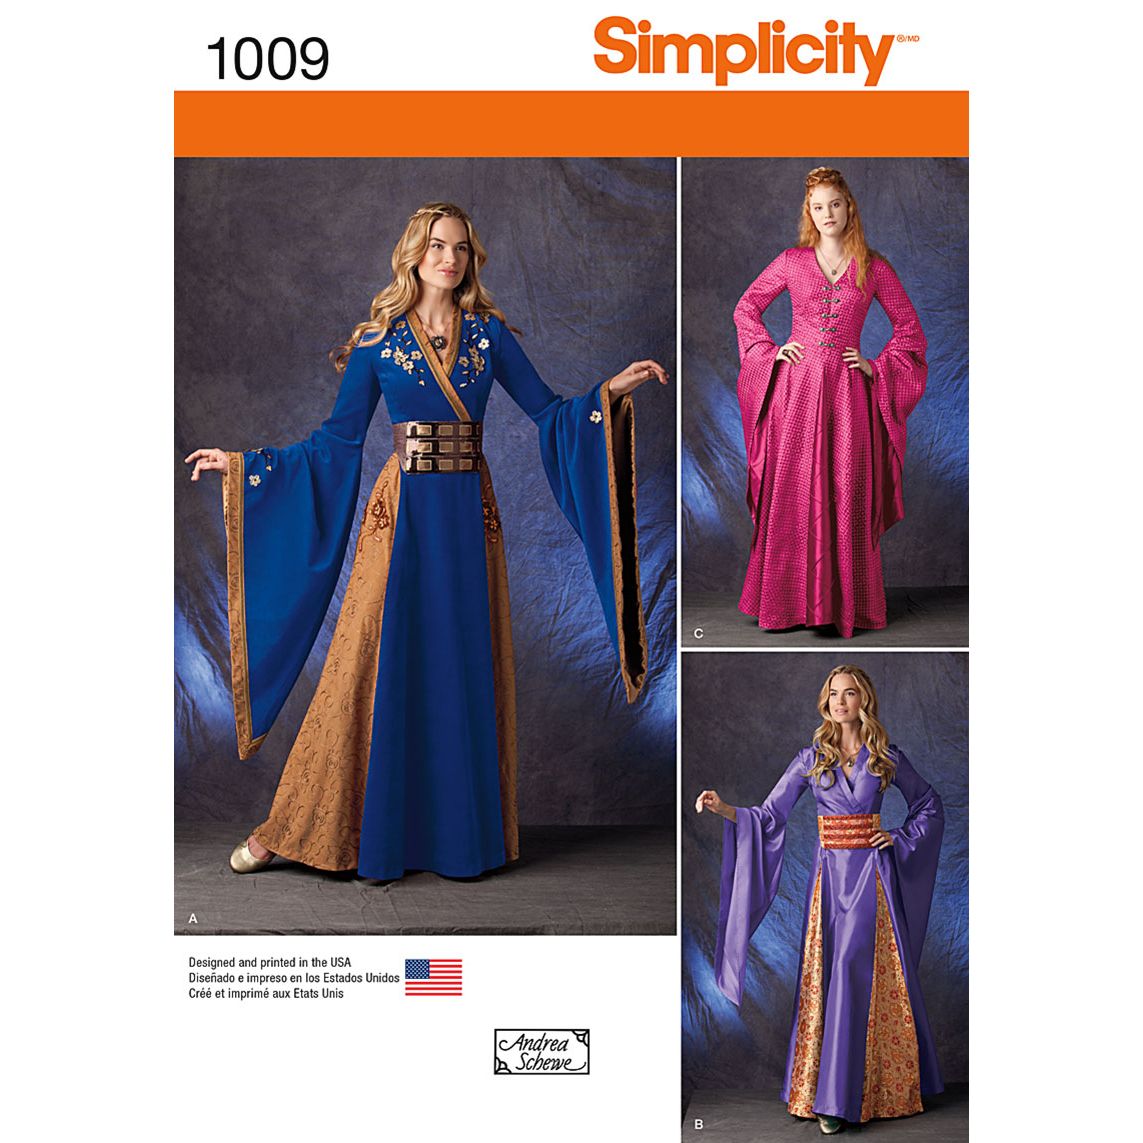 Simplicity Misses' Medieval Maiden Fantasy Costume Sewing Pattern, 1009